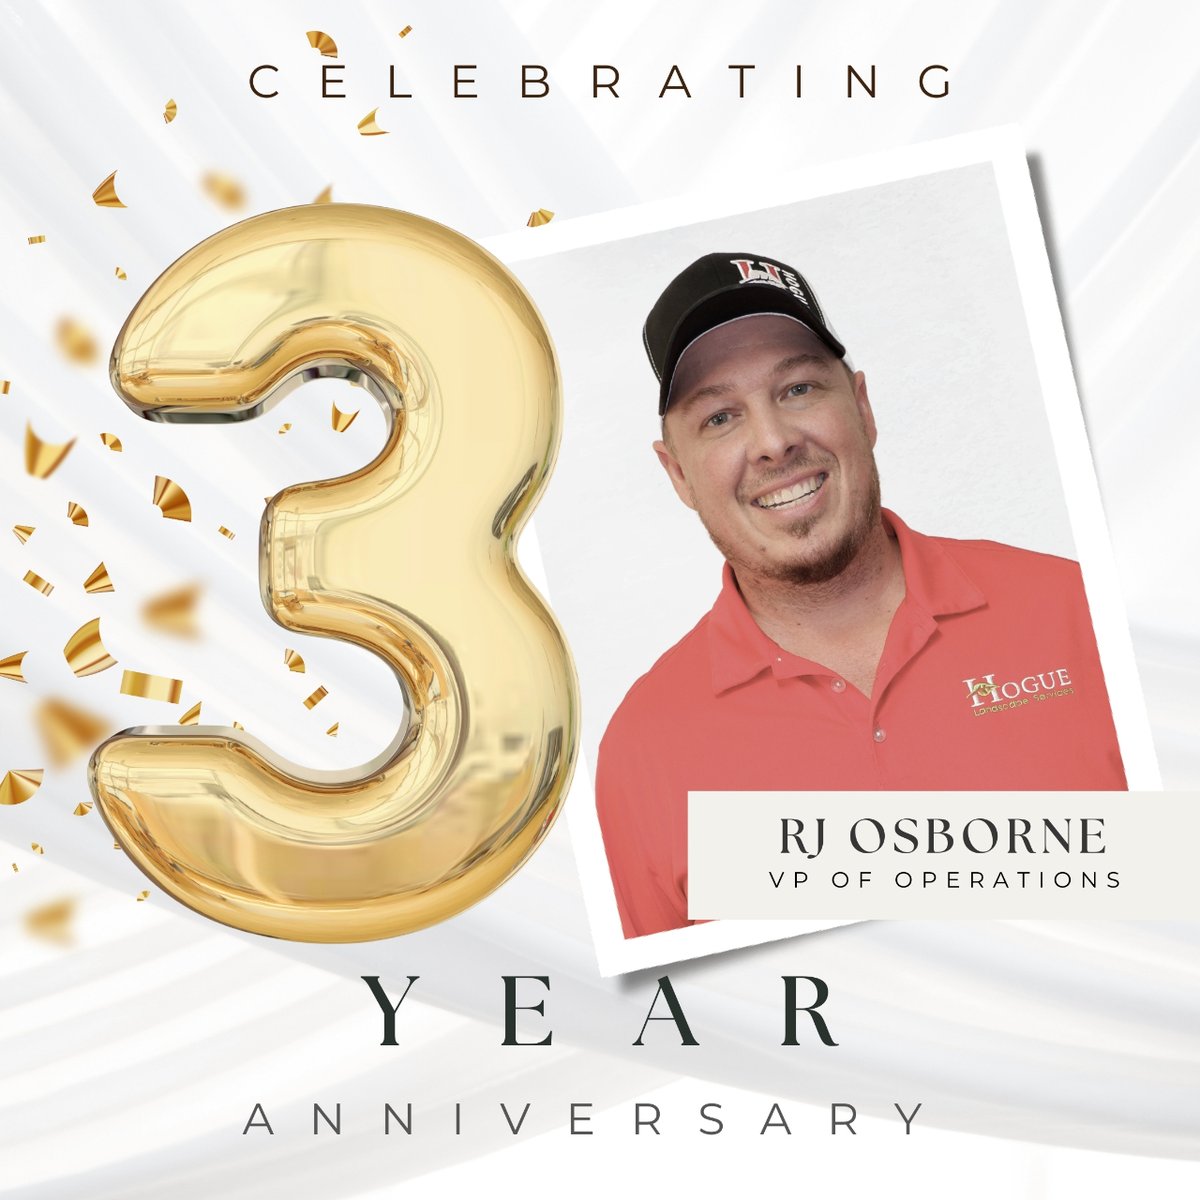 ⭐⭐⭐ Cheers to RJ Osborne on 3 years of exceptional leadership as our VP of Operations at Hogue Landscape Services! Your dedication and vision continue to inspire us. Here's to many more milestones together!🍃🌟 #TeamHogue #EmployeeSpotlight #EmployeeAppreciation